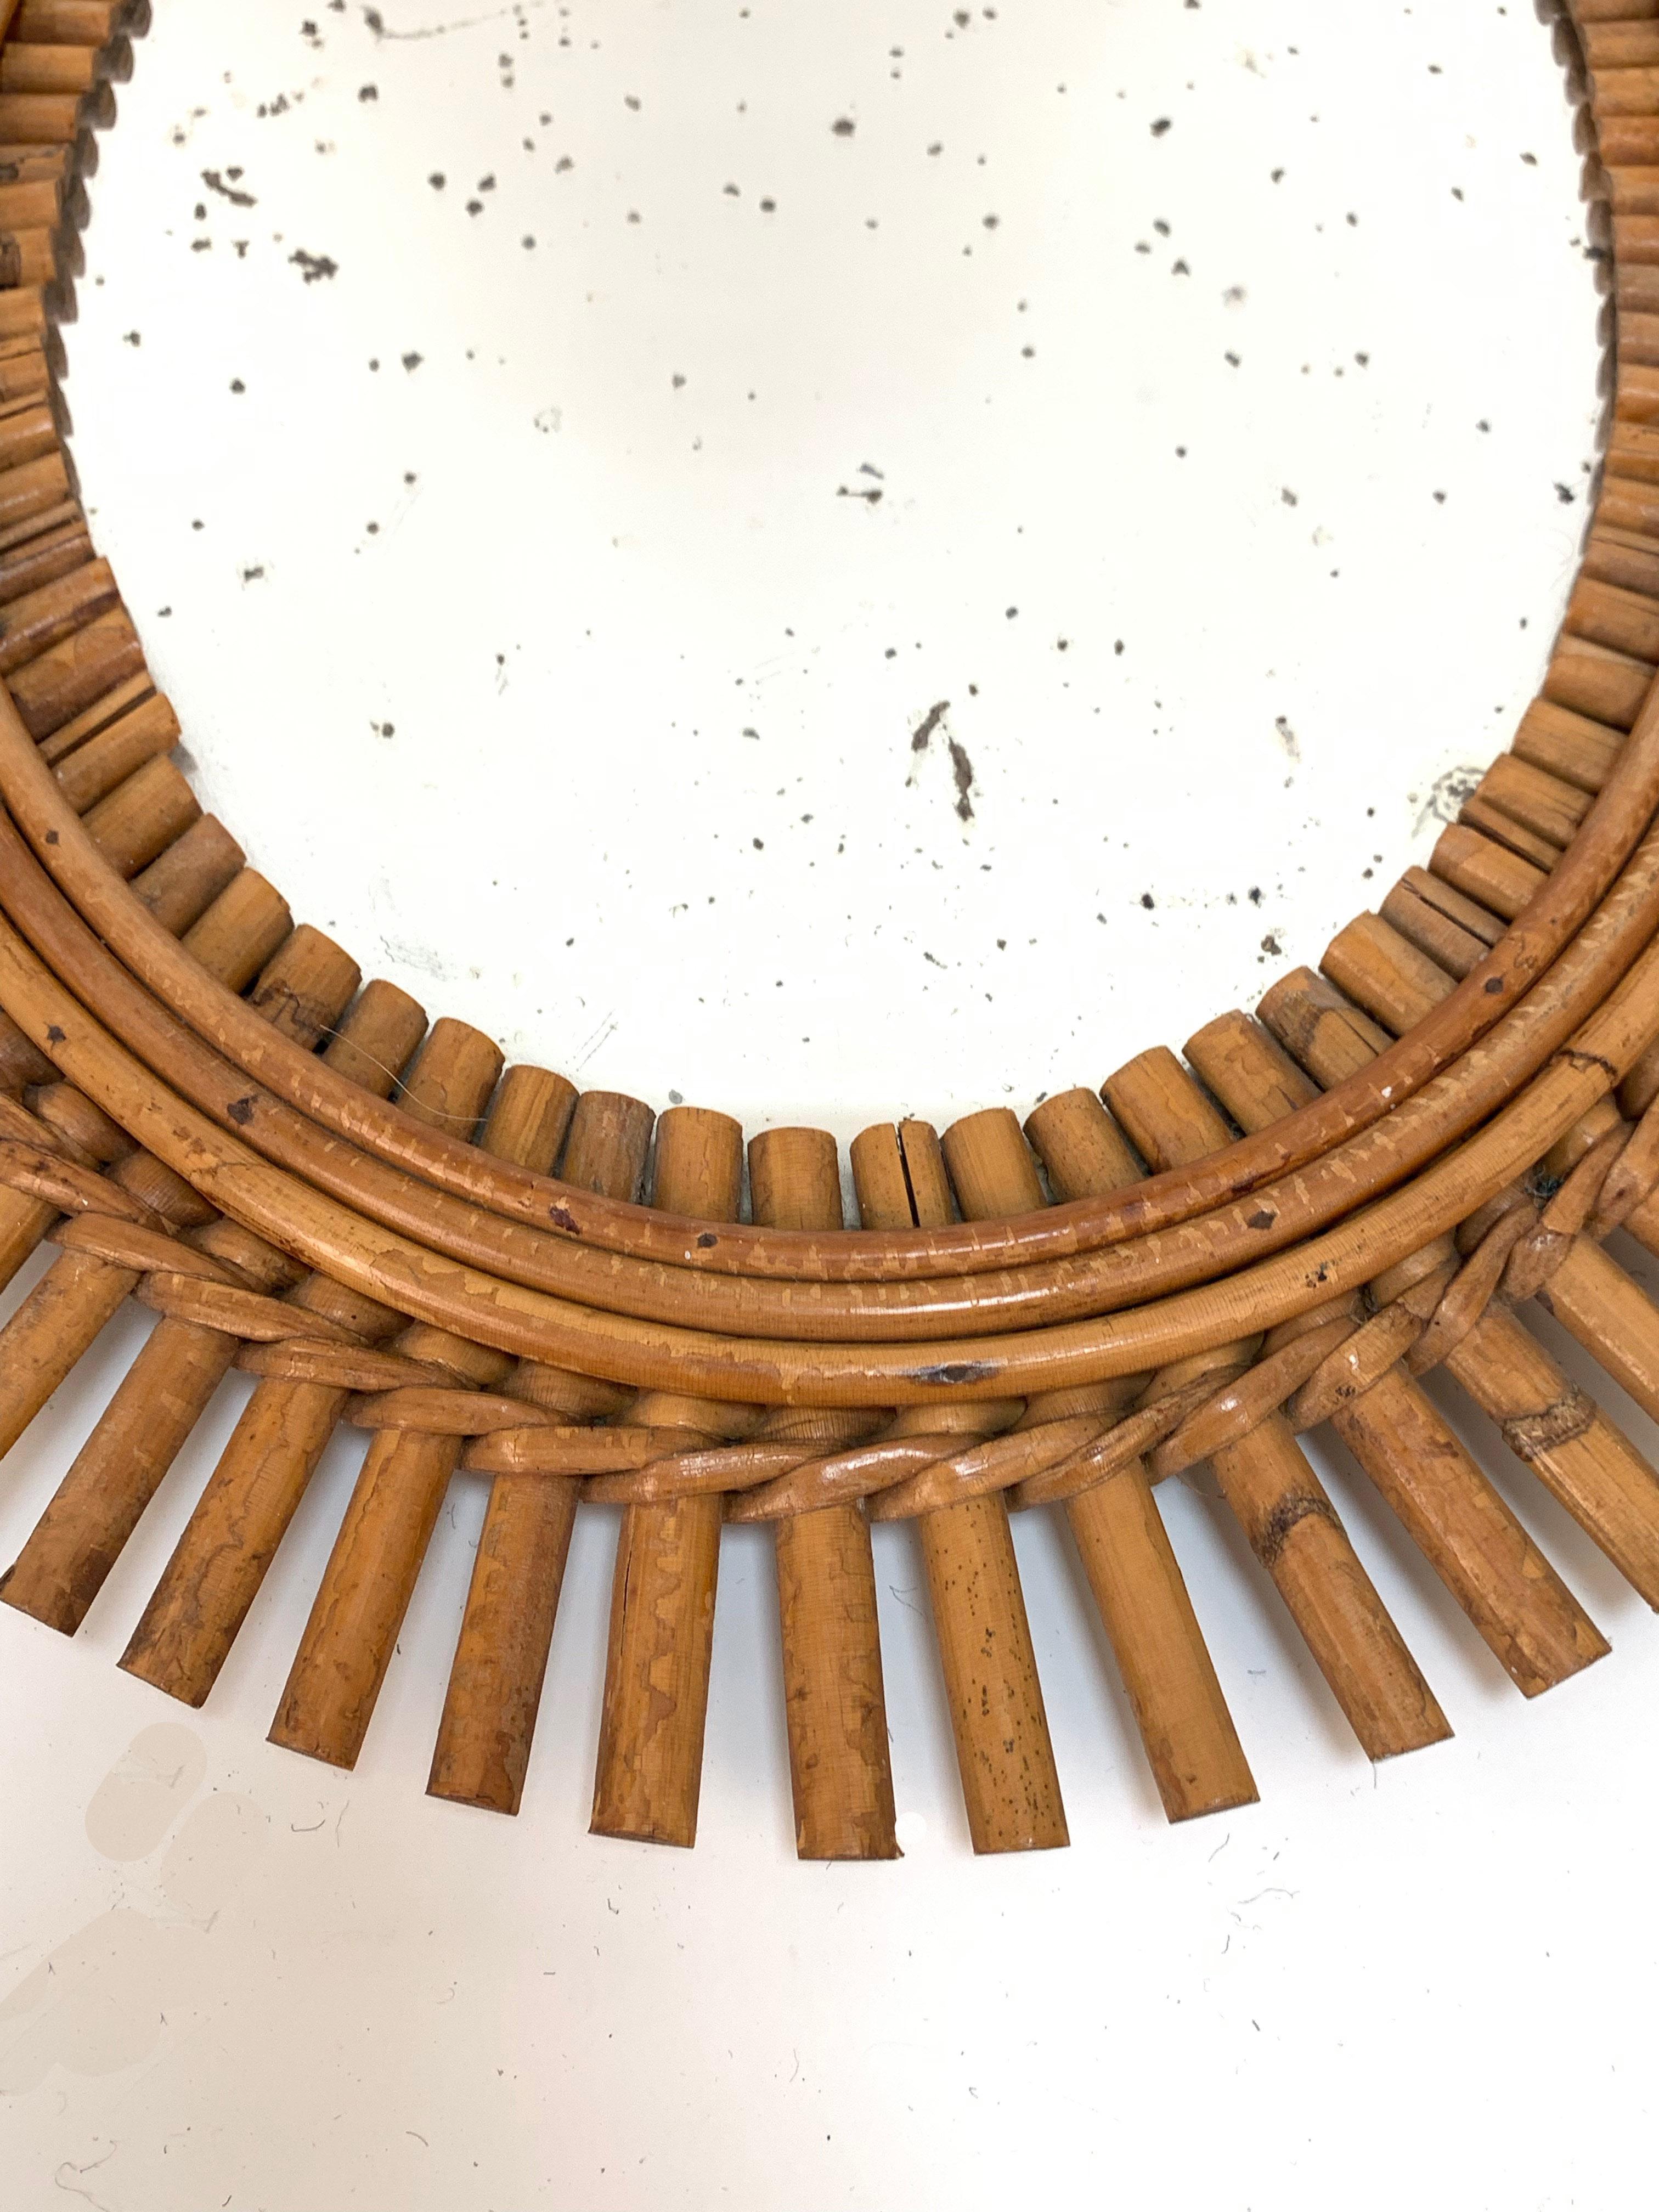 Mid-Century Modern French Riviera Oval Wall Mirror in Bamboo and Rattan, 1960s Midcentury